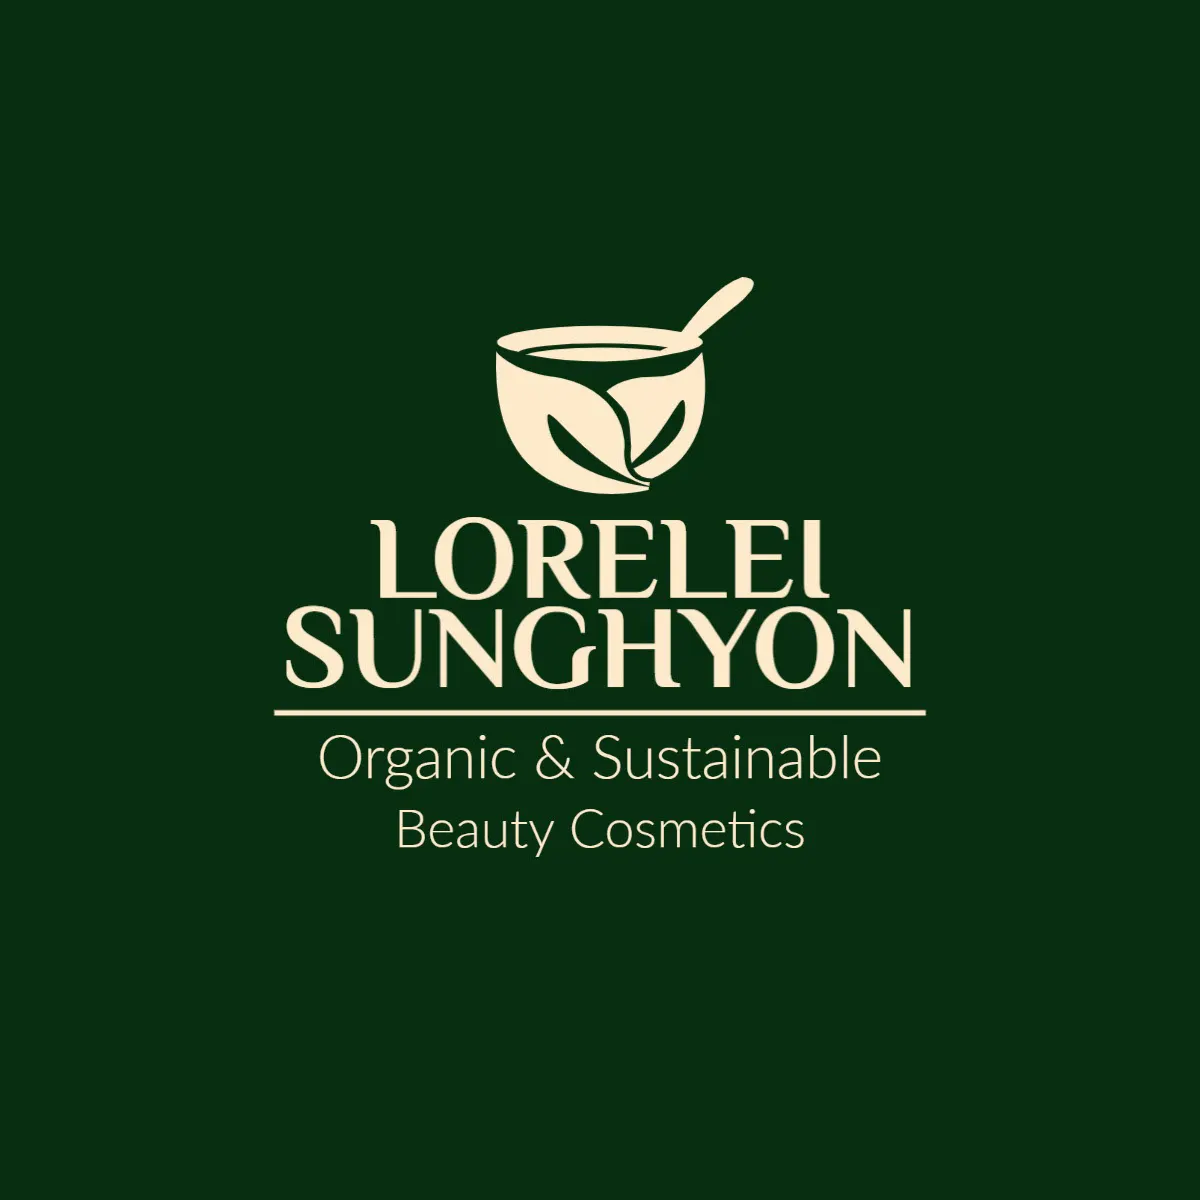 Green and Beige Organic and Sustainable Logo